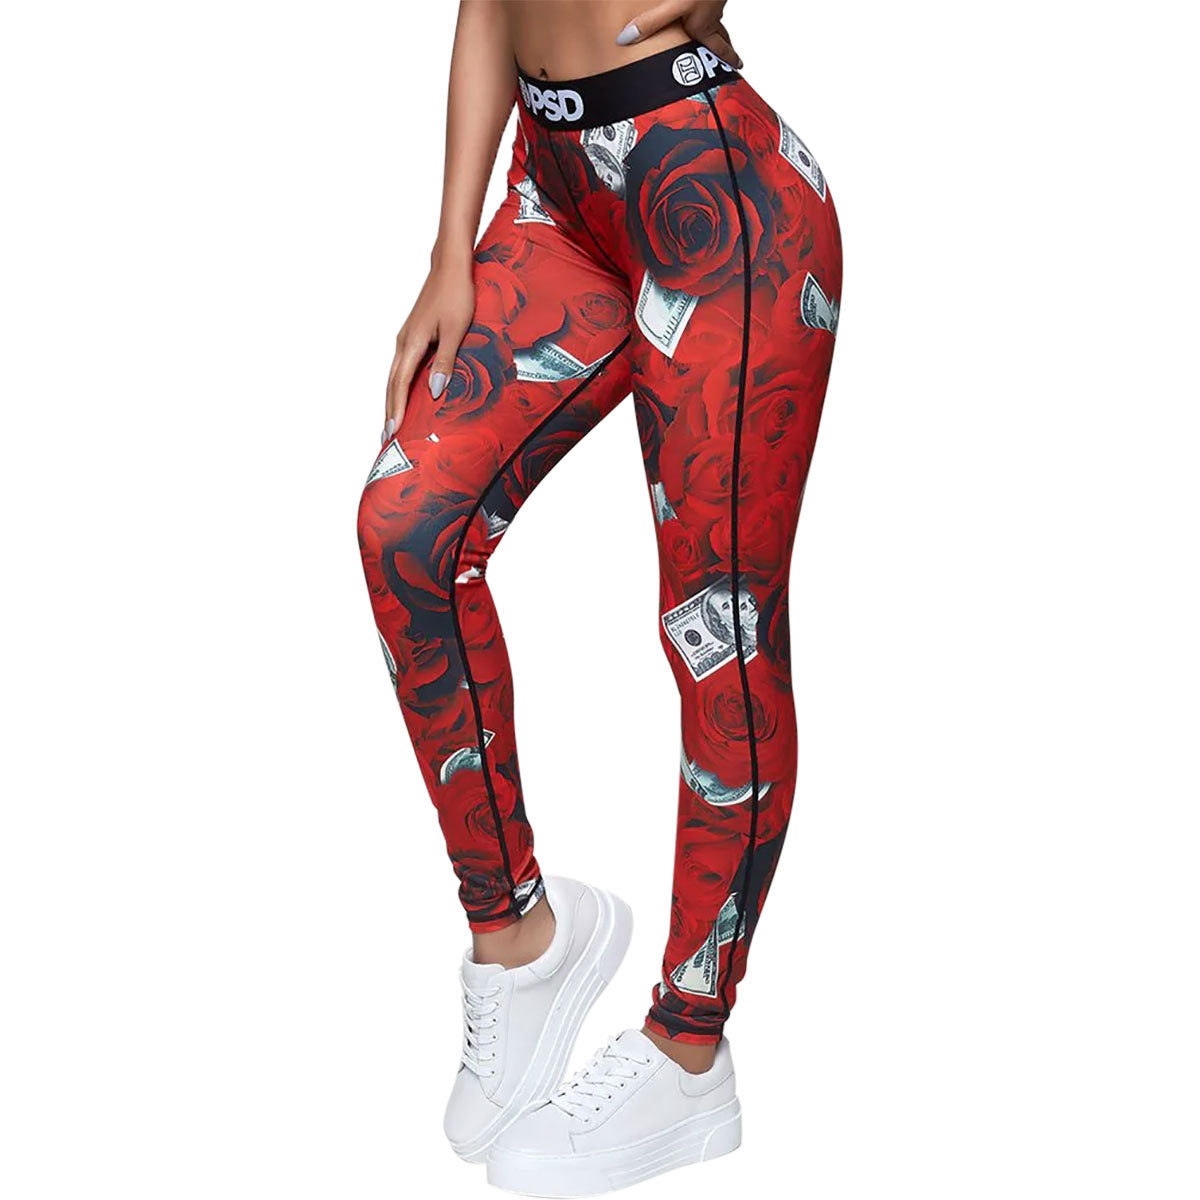 PSD 100 Roses Legging Women's Pants (Refurbished, Without Tags) –